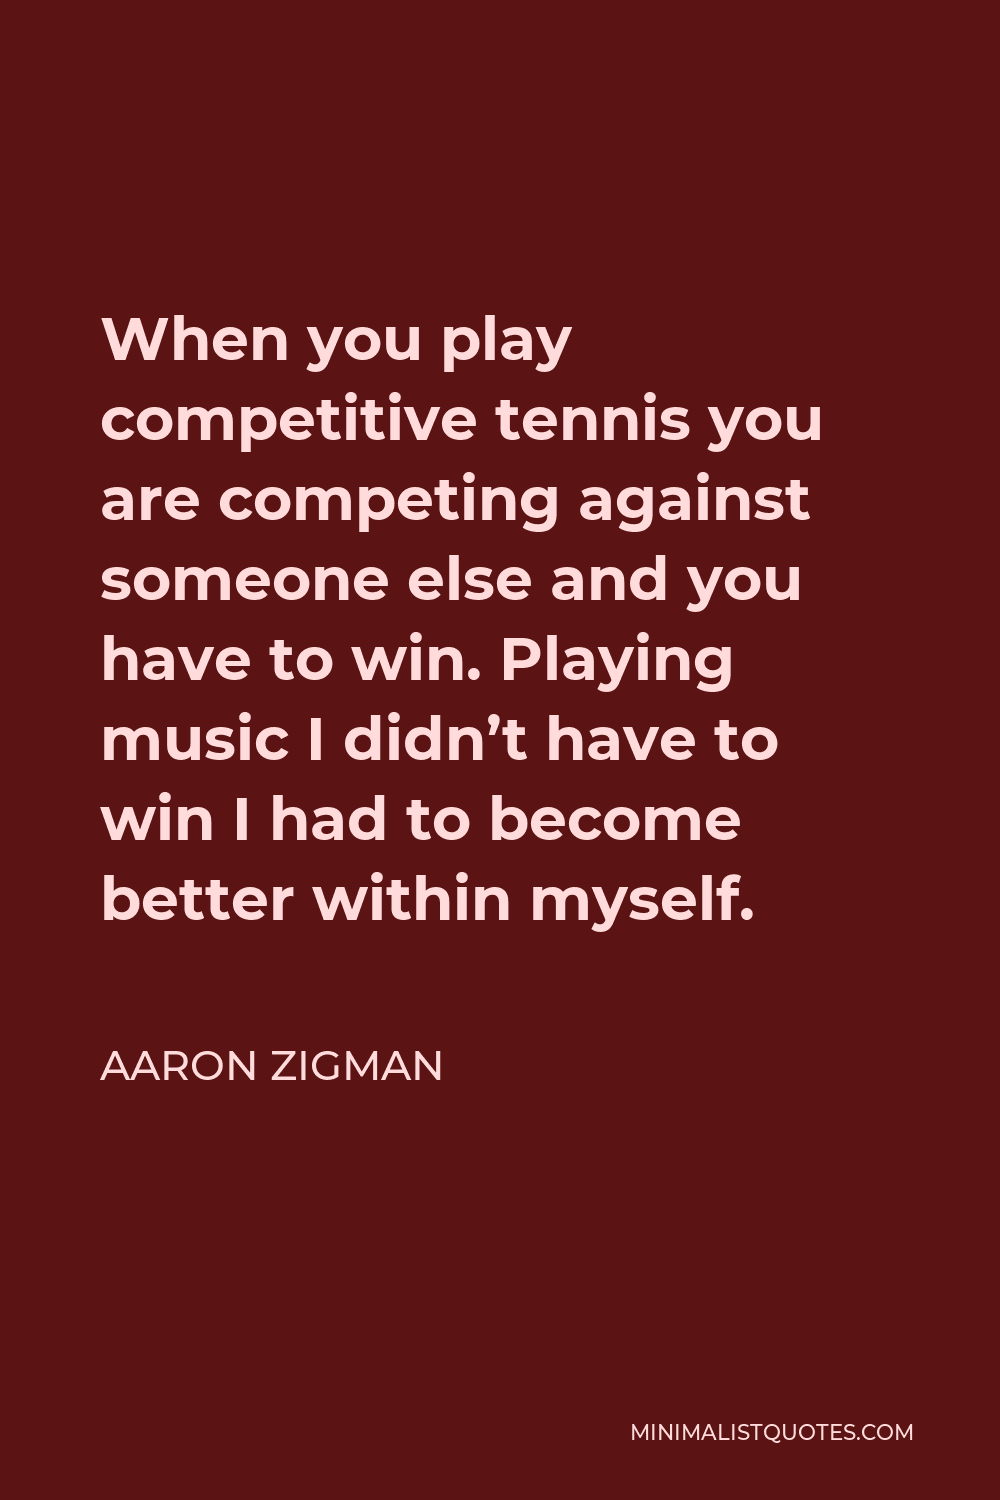 Aaron Zigman Quote - When you play competitive tennis you are competing against someone else and you have to win. Playing music I didn’t have to win I had to become better within myself.